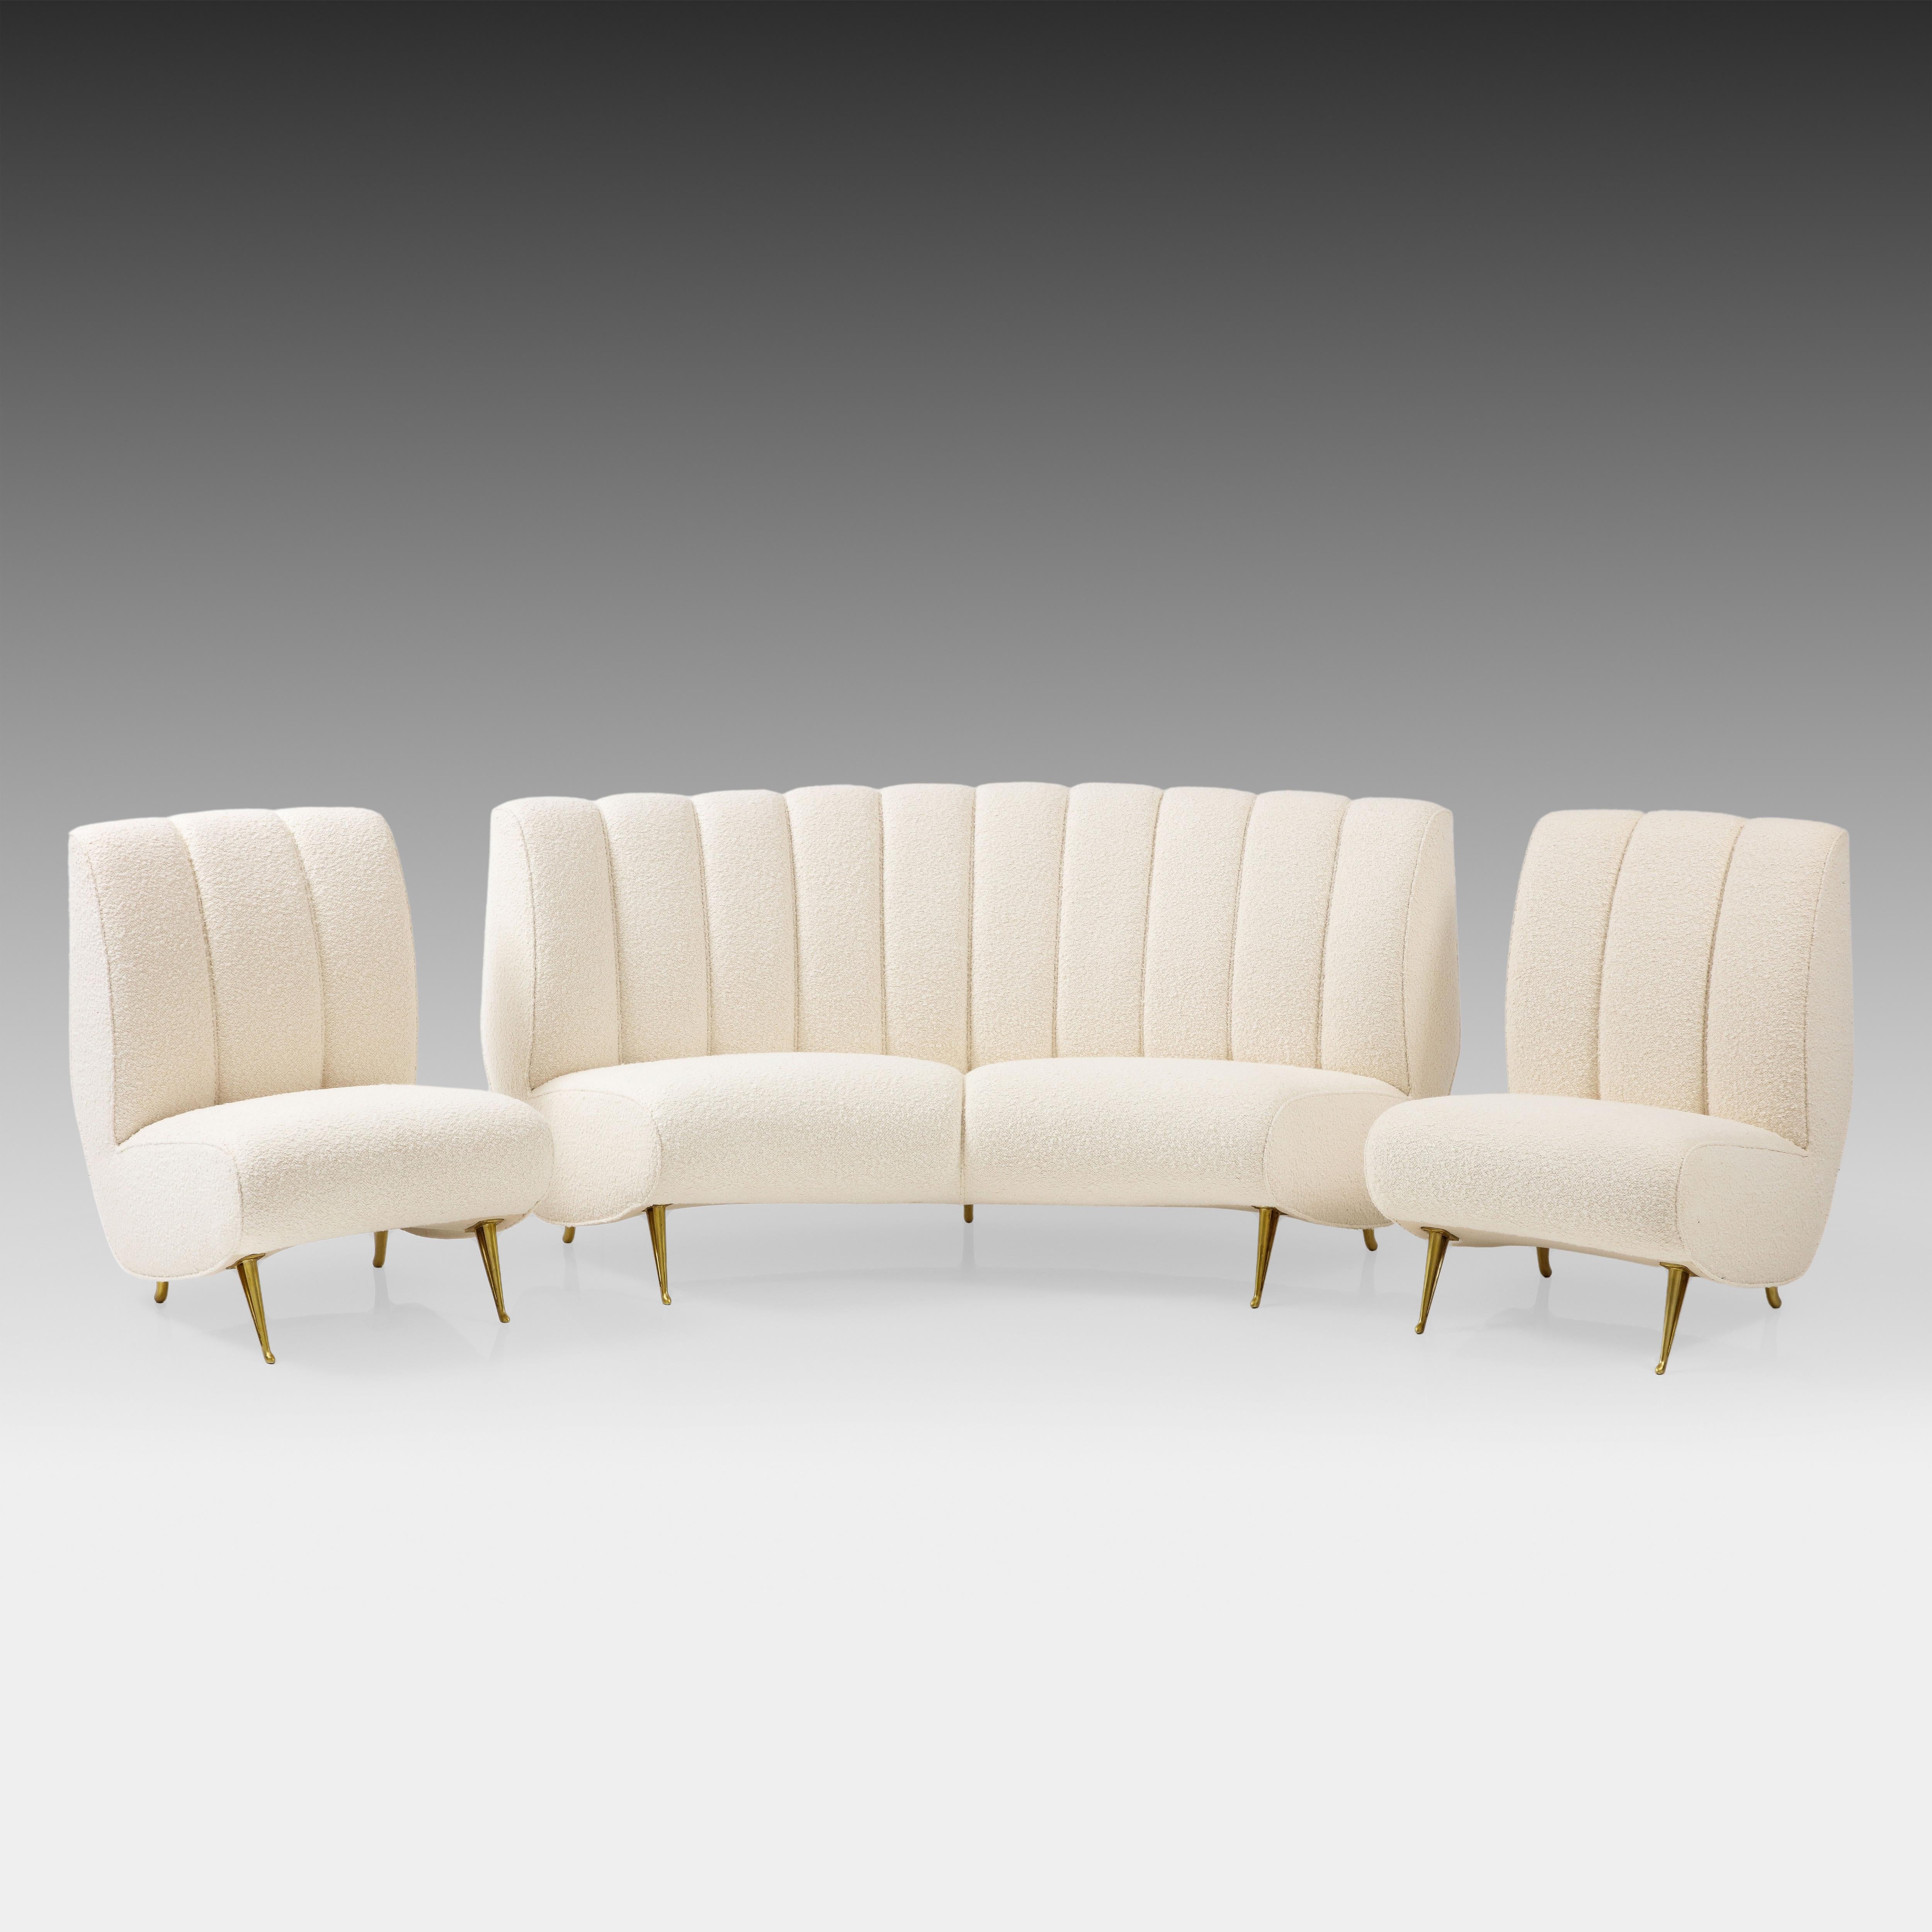 ISA Bergamo Rare Pair of Lounge or Slipper Chairs in Ivory Bouclé, Italy, 1950s For Sale 7